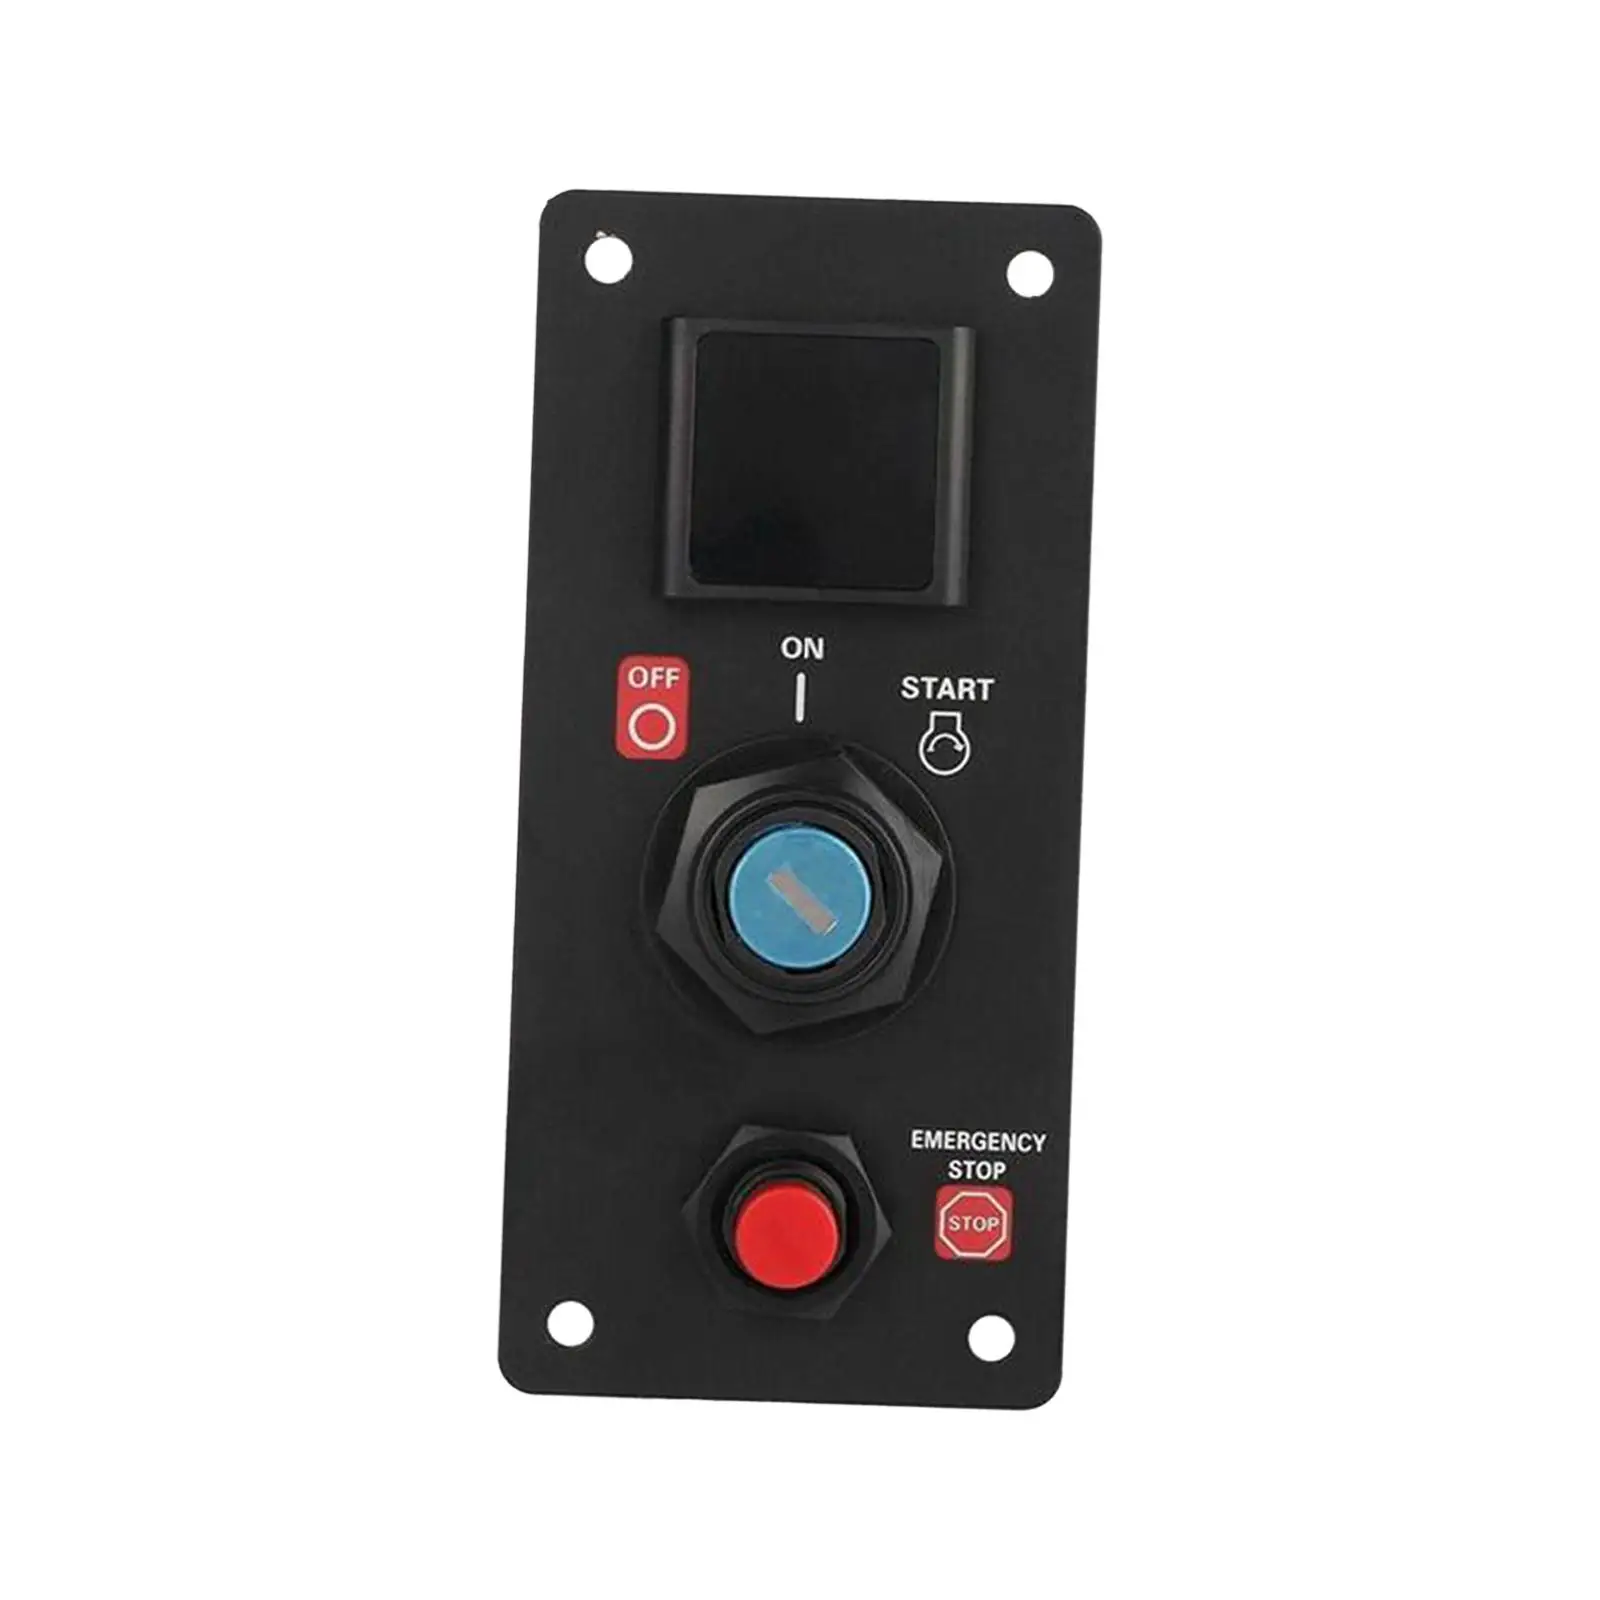 Ignition Switch Panel 06323-zz5-764 on Off Start for Honda Outboard